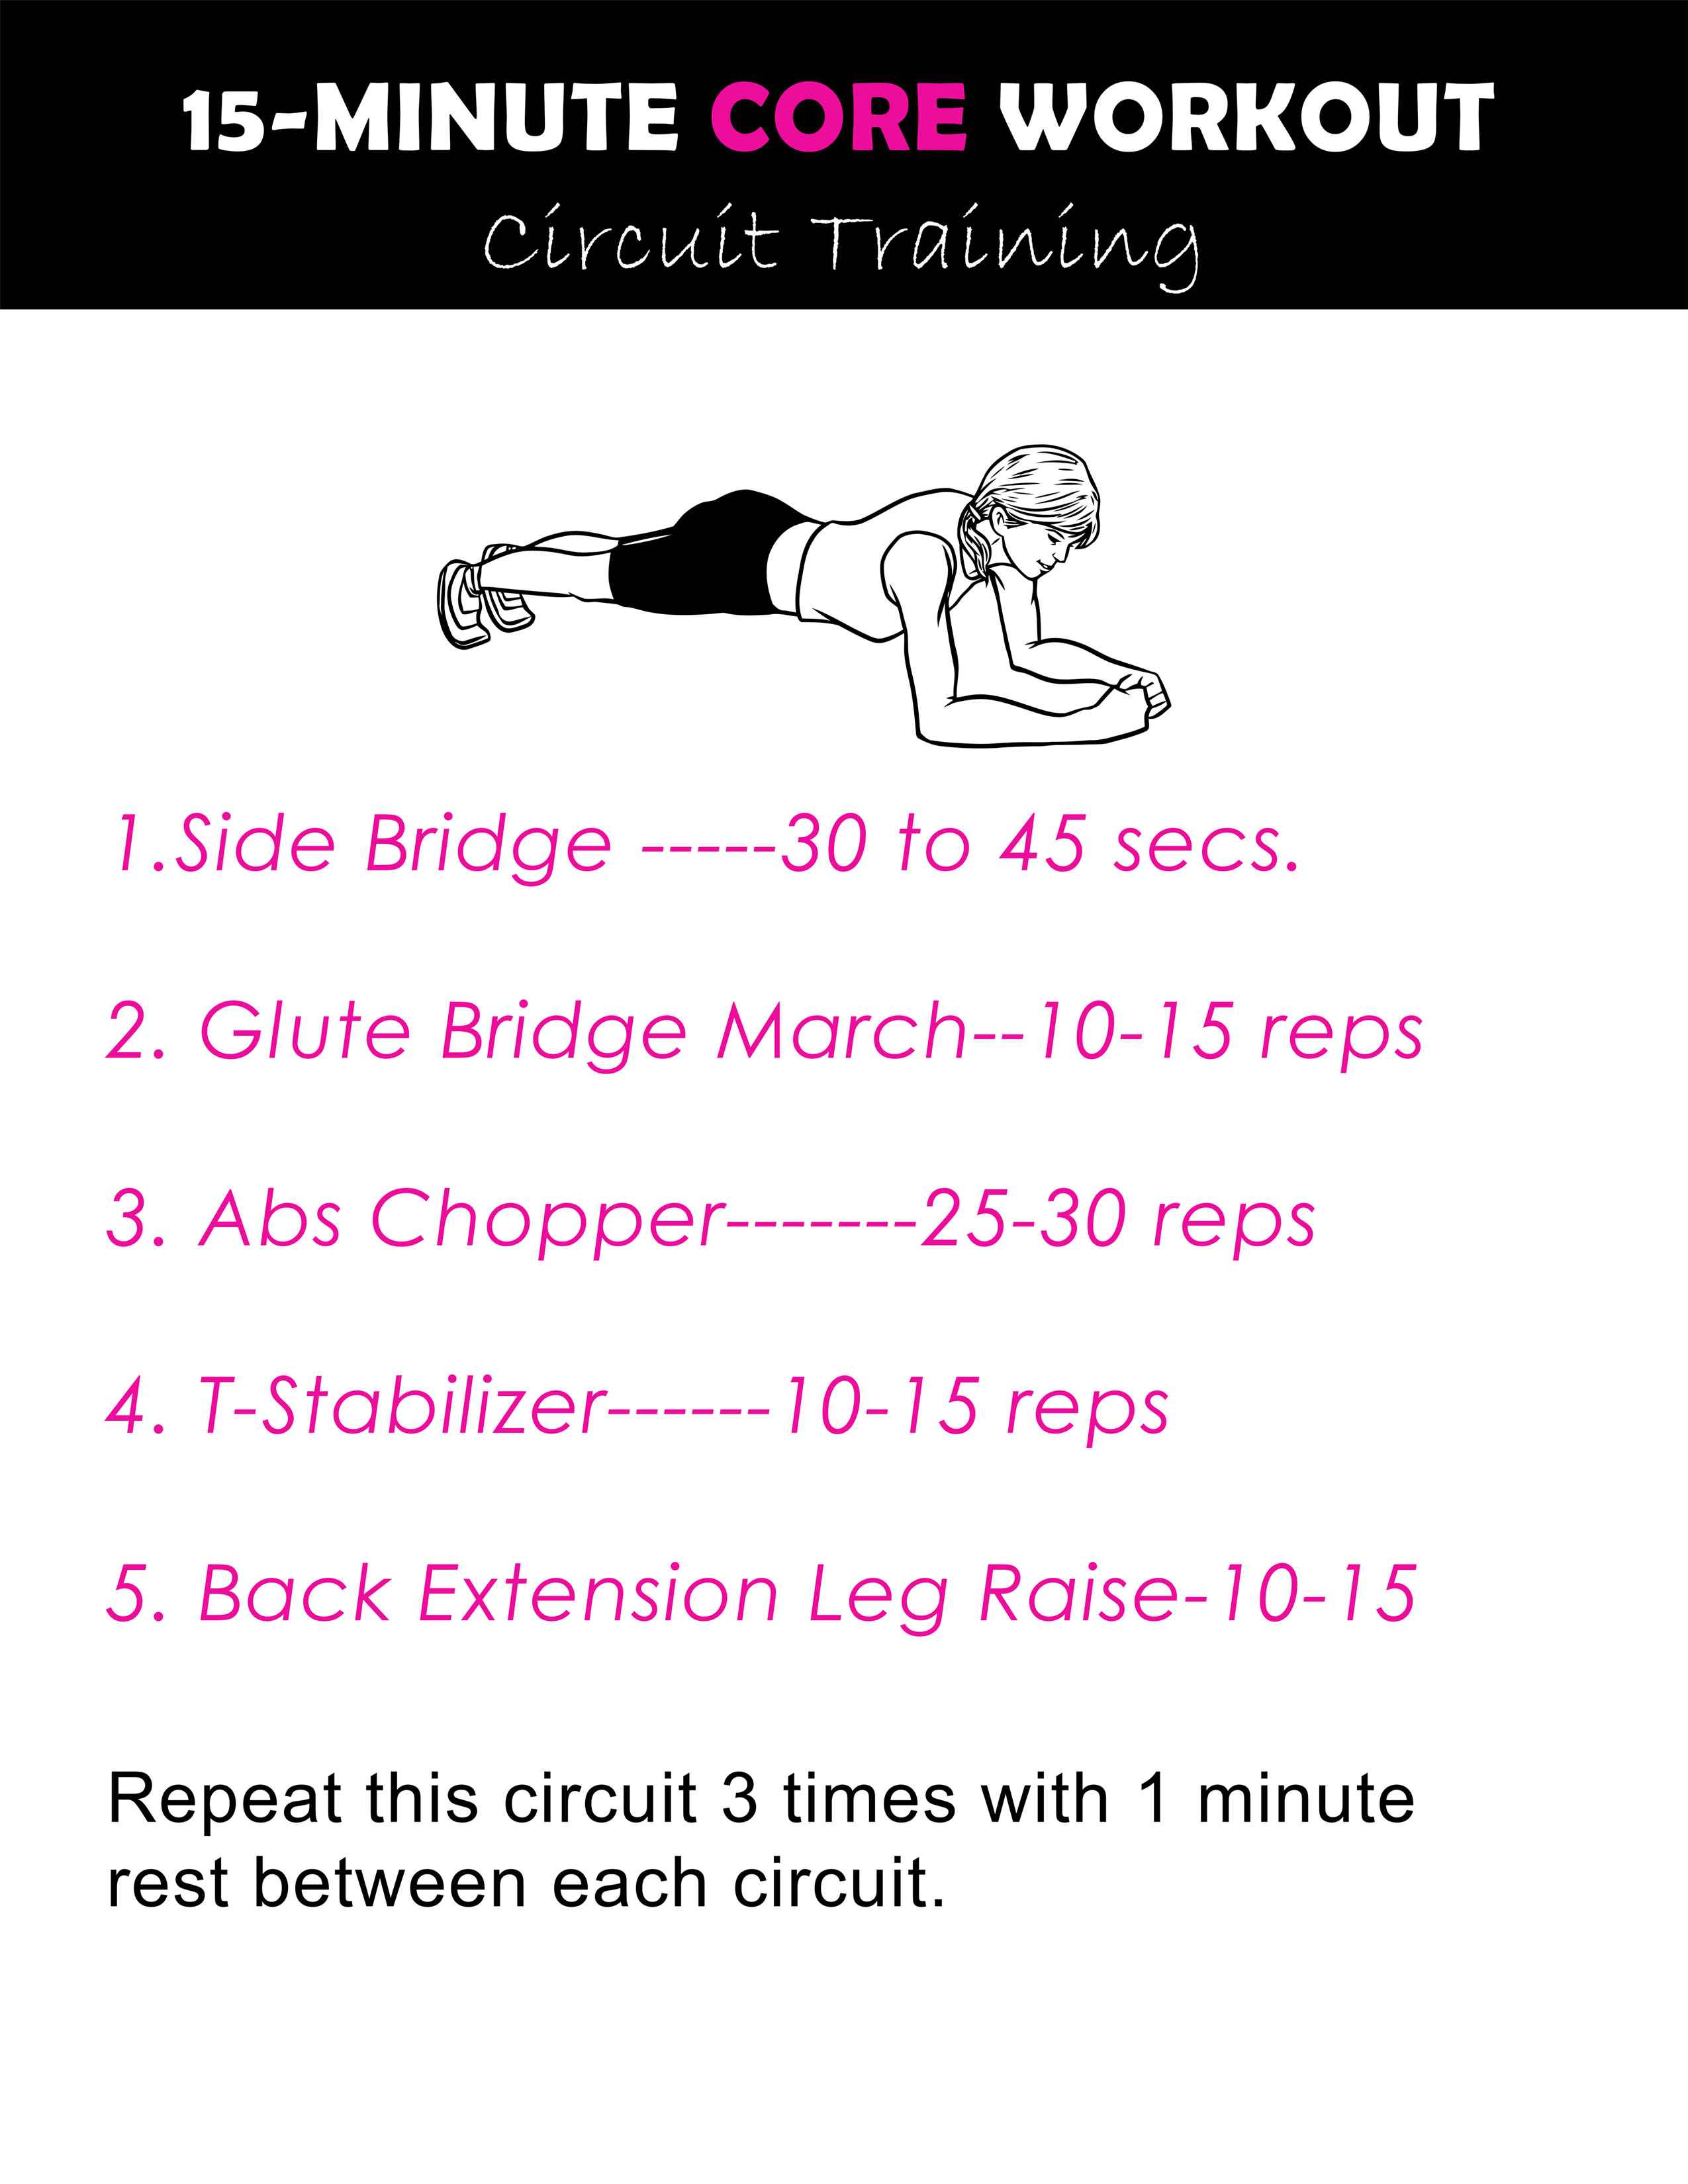 15 minute core training workout you can print or share.